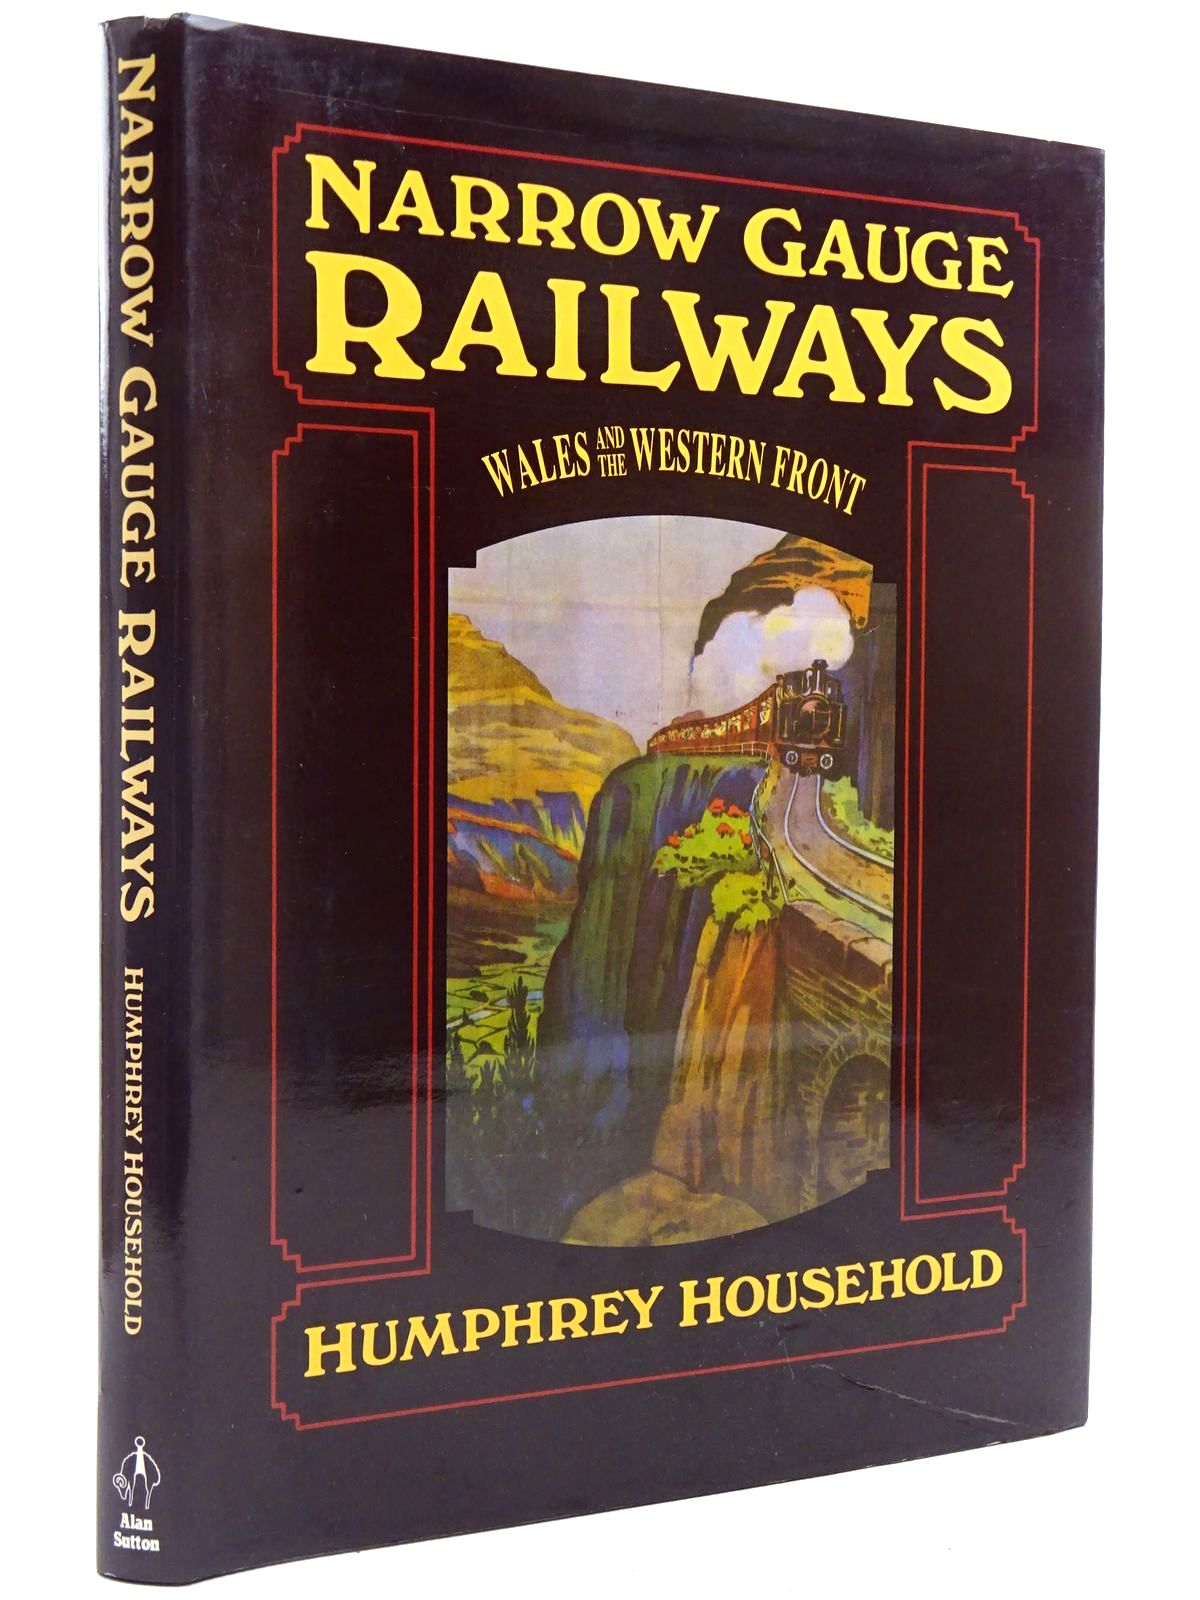 Photo of NARROW GAUGE RAILWAYS WALES AND THE WESTERN FRONT written by Household, Humphrey published by Alan Sutton (STOCK CODE: 2128790)  for sale by Stella & Rose's Books